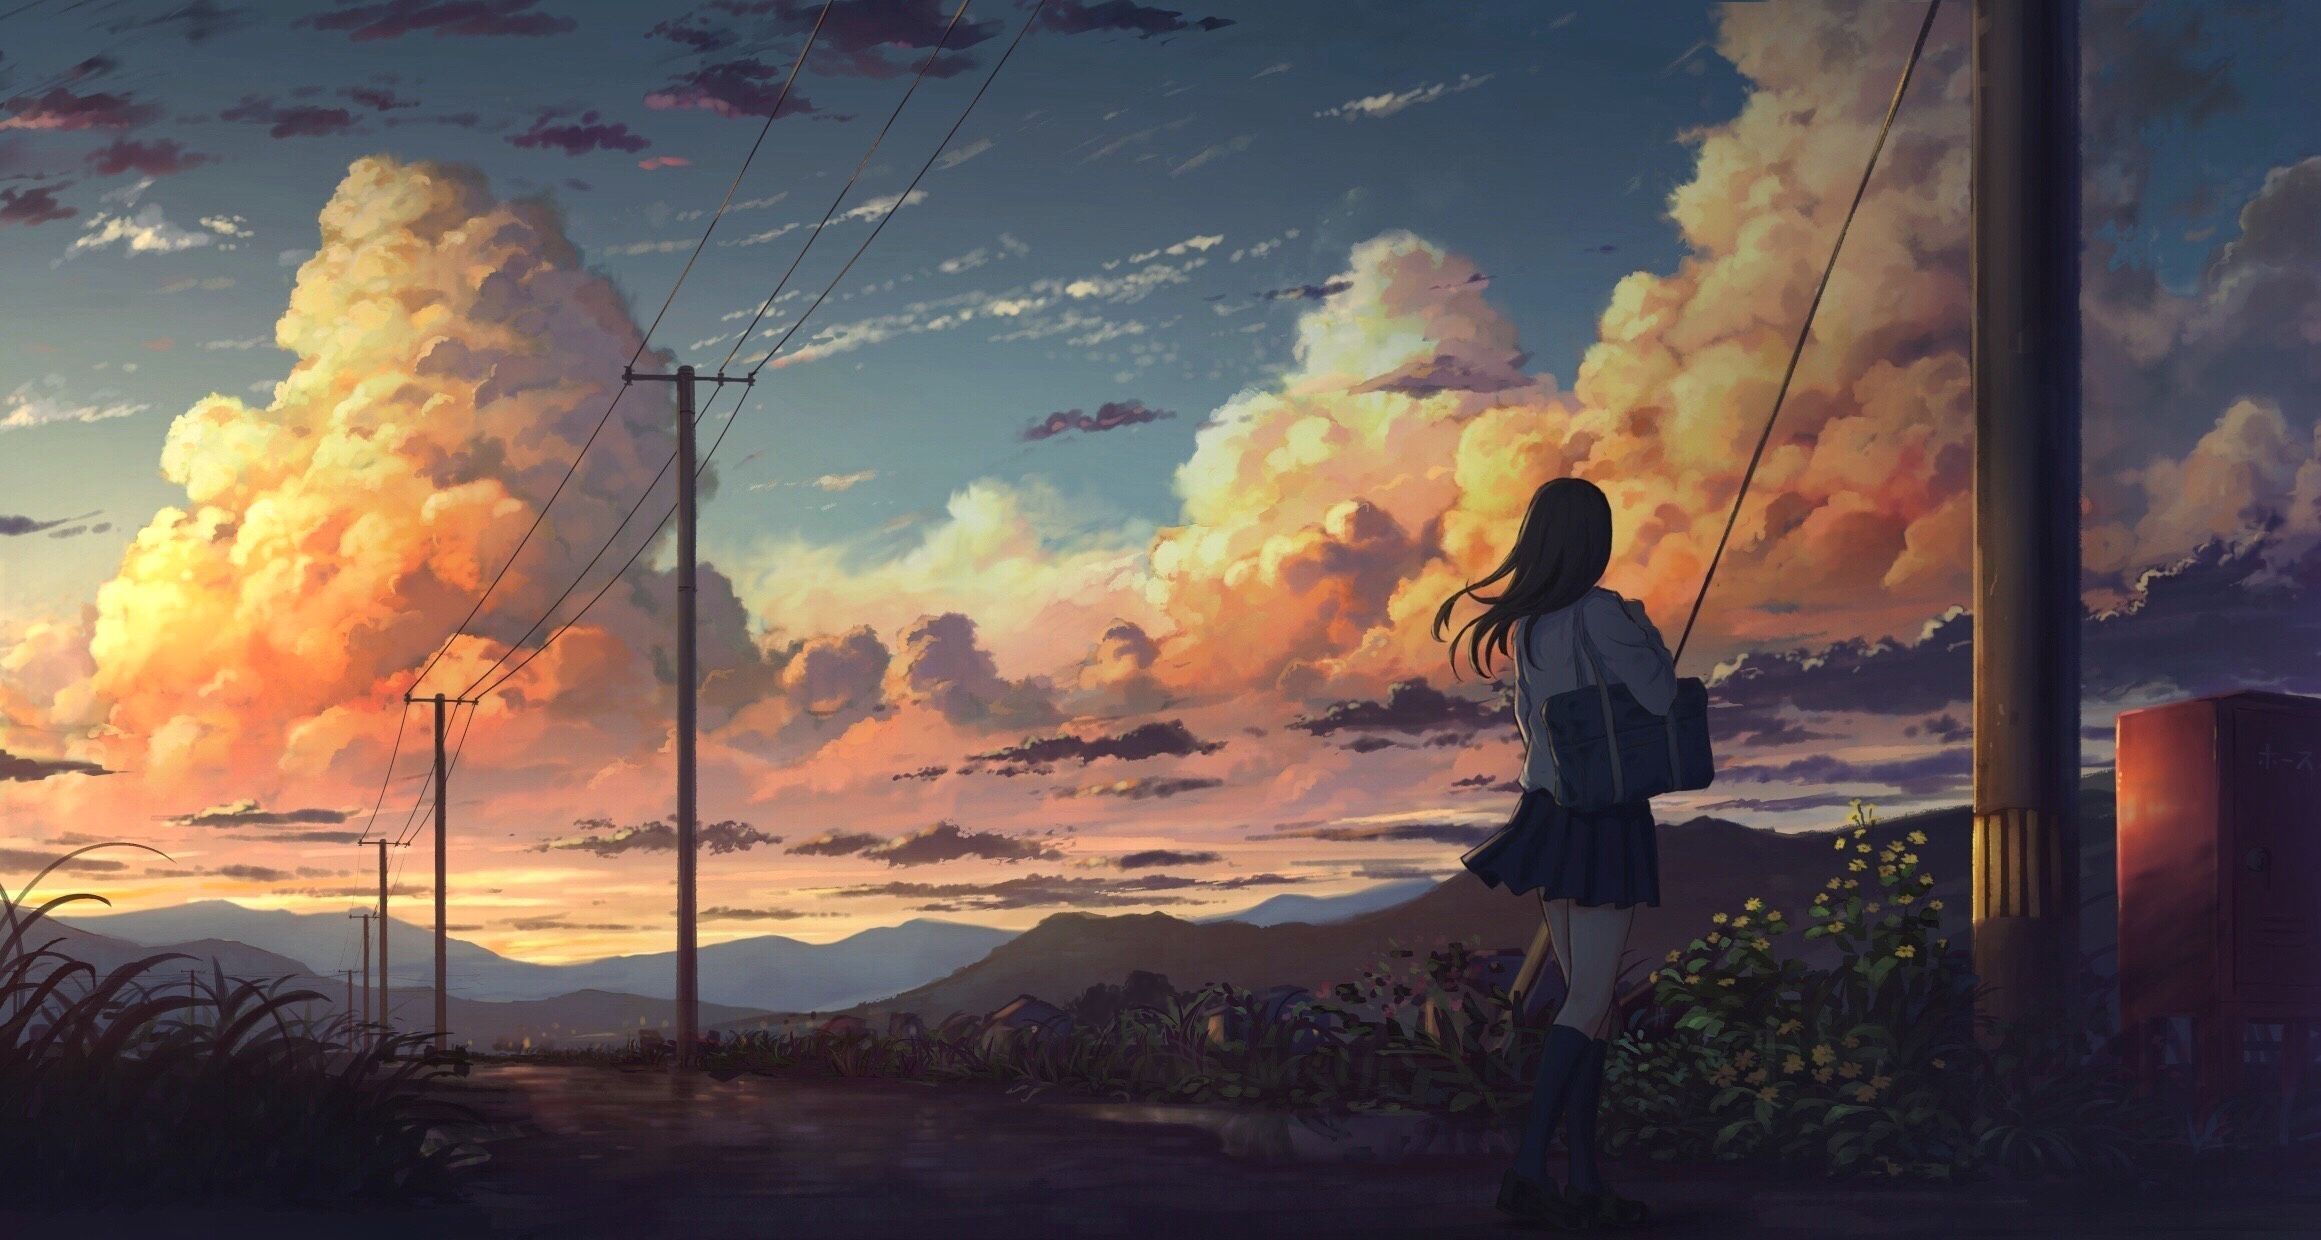 Artist Combines Photorealistic and Anime Style Drawings in Beautifully  Nostalgic Illustrations | Anime scenery, Scenery wallpaper, Anime scenery  wallpaper